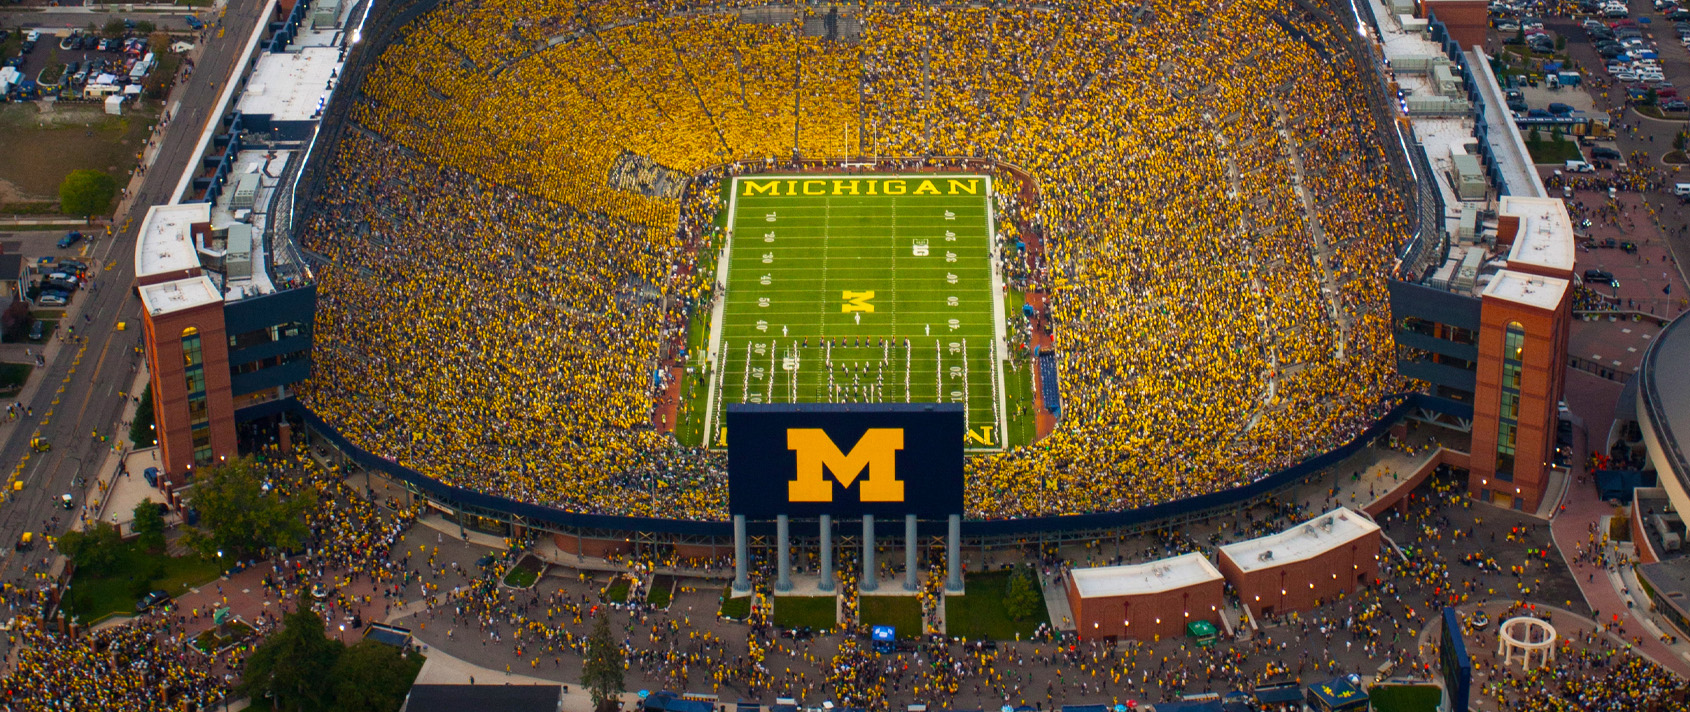 CONNECT SPORTS – 7 Venues in Ann Arbor that Make the Grade